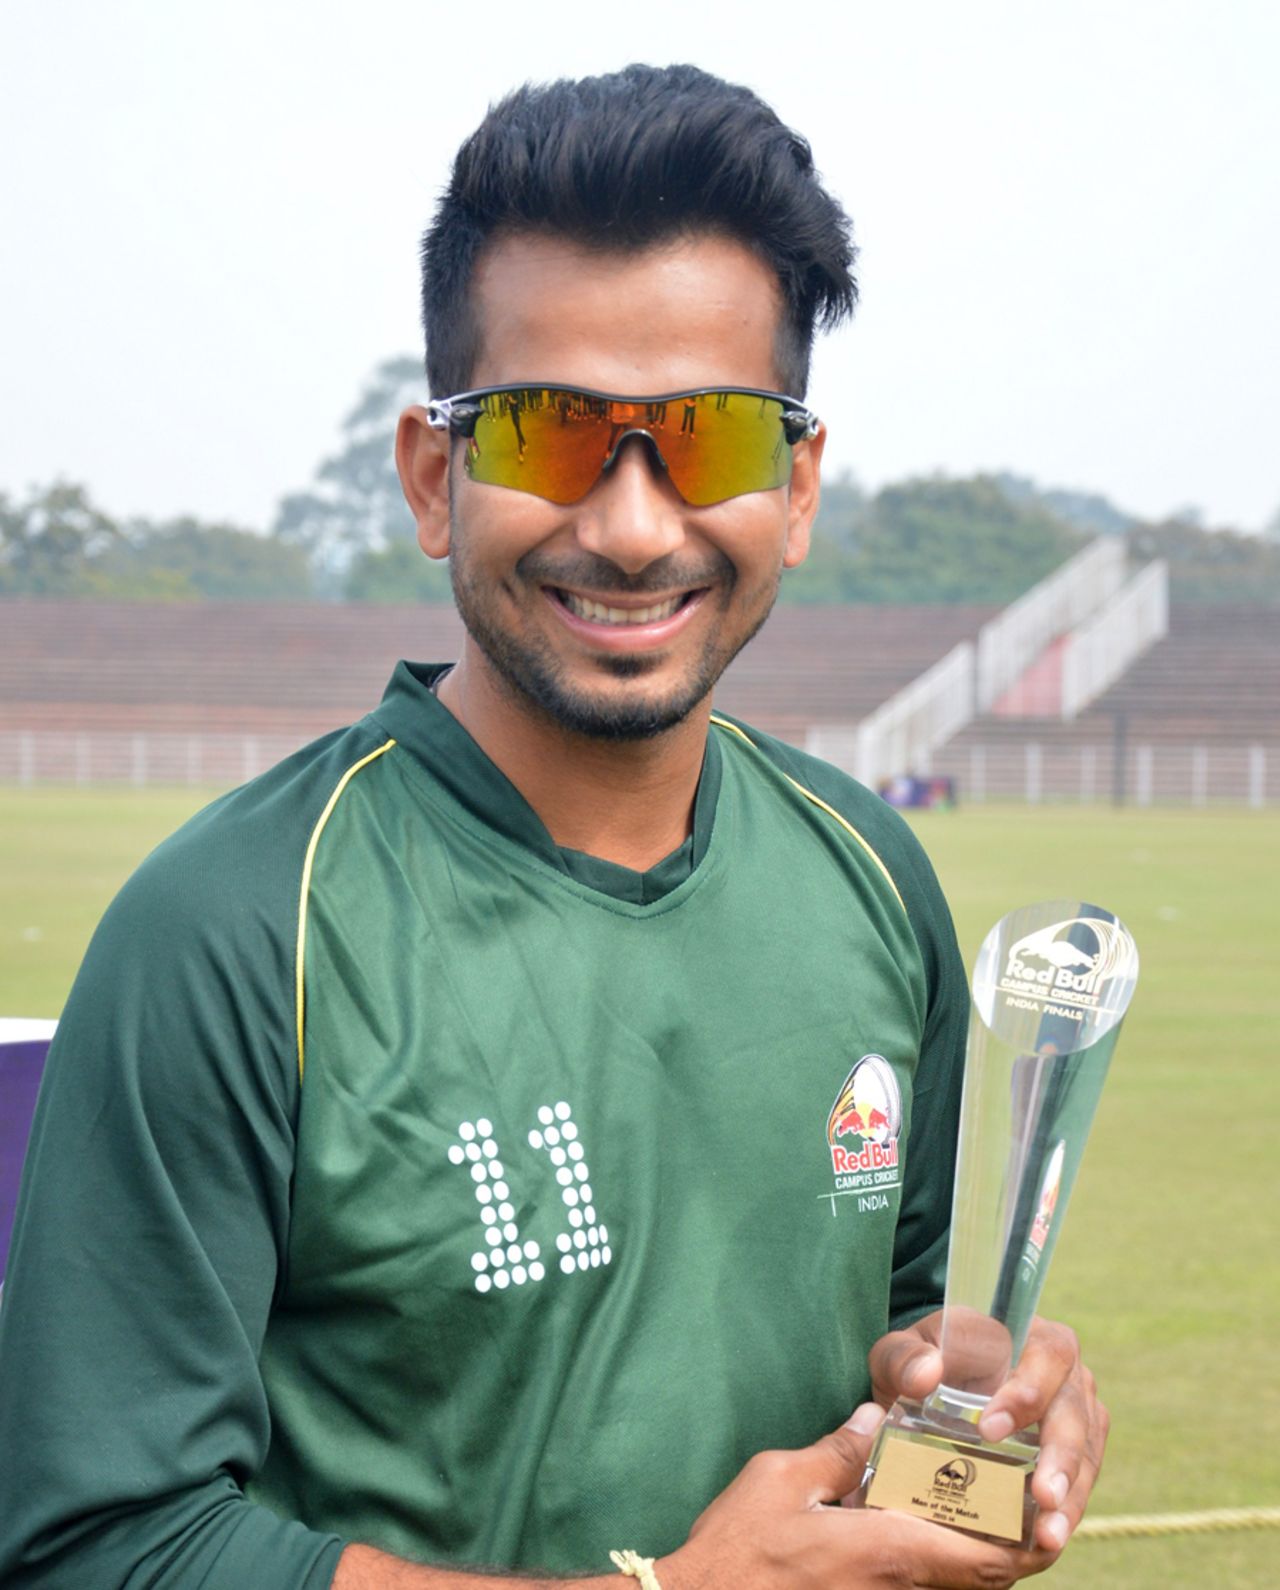 Left-arm spinner Gurinder Singh was Man of the Match for his five-for, DAV College v SRM University, Red Bull Campus Cricket 2014, Chandigarh, February 3, 2014